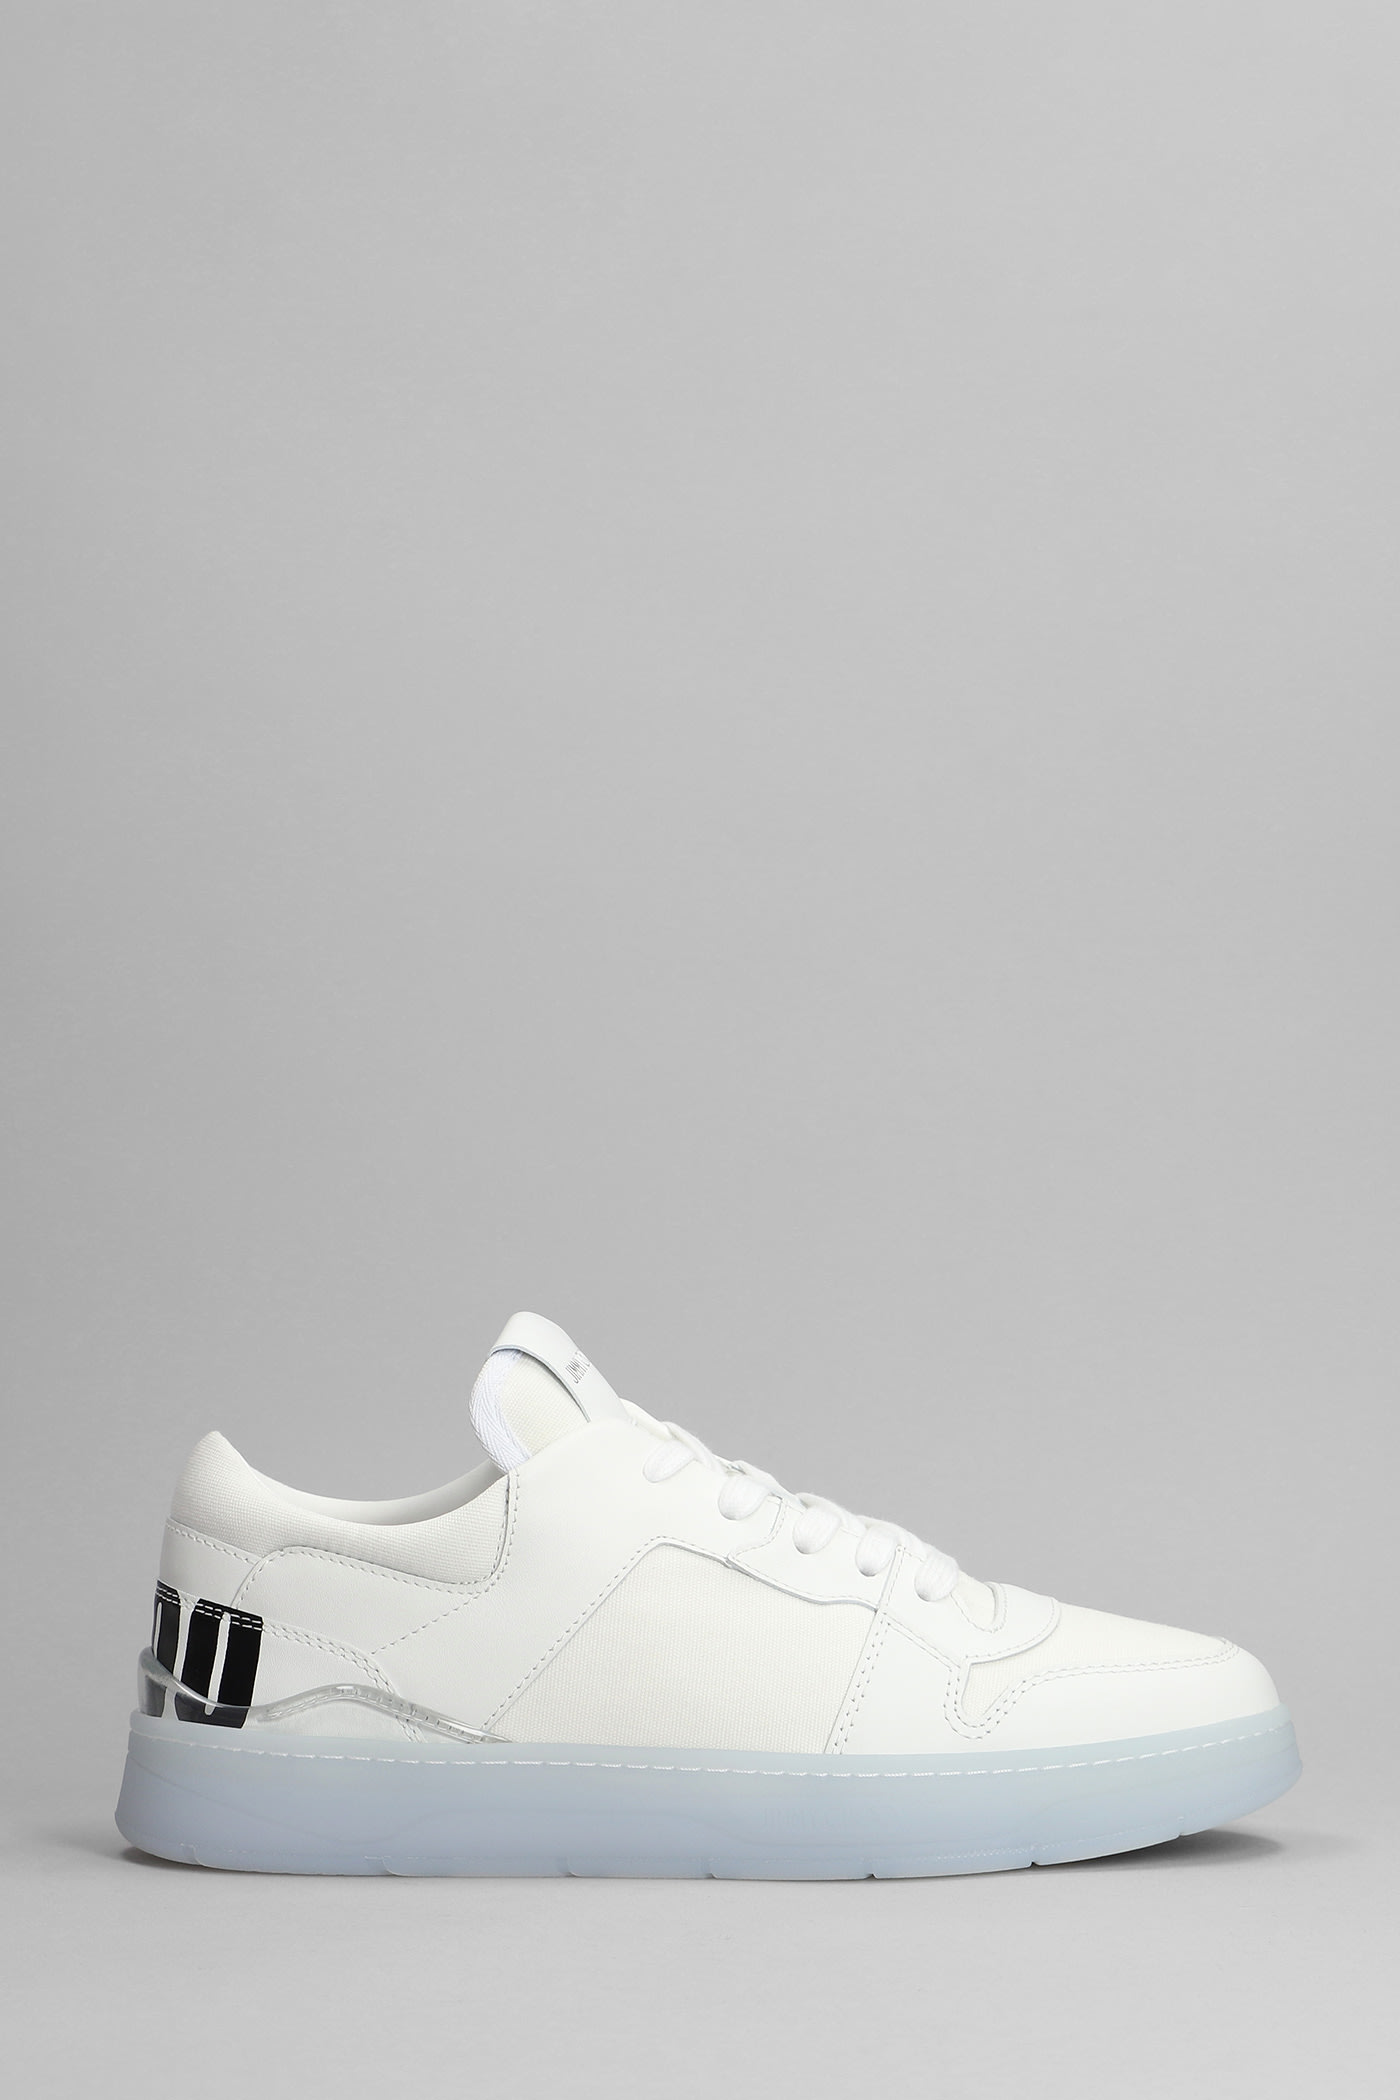 JIMMY CHOO FLORENT SNEAKERS IN WHITE COTTON